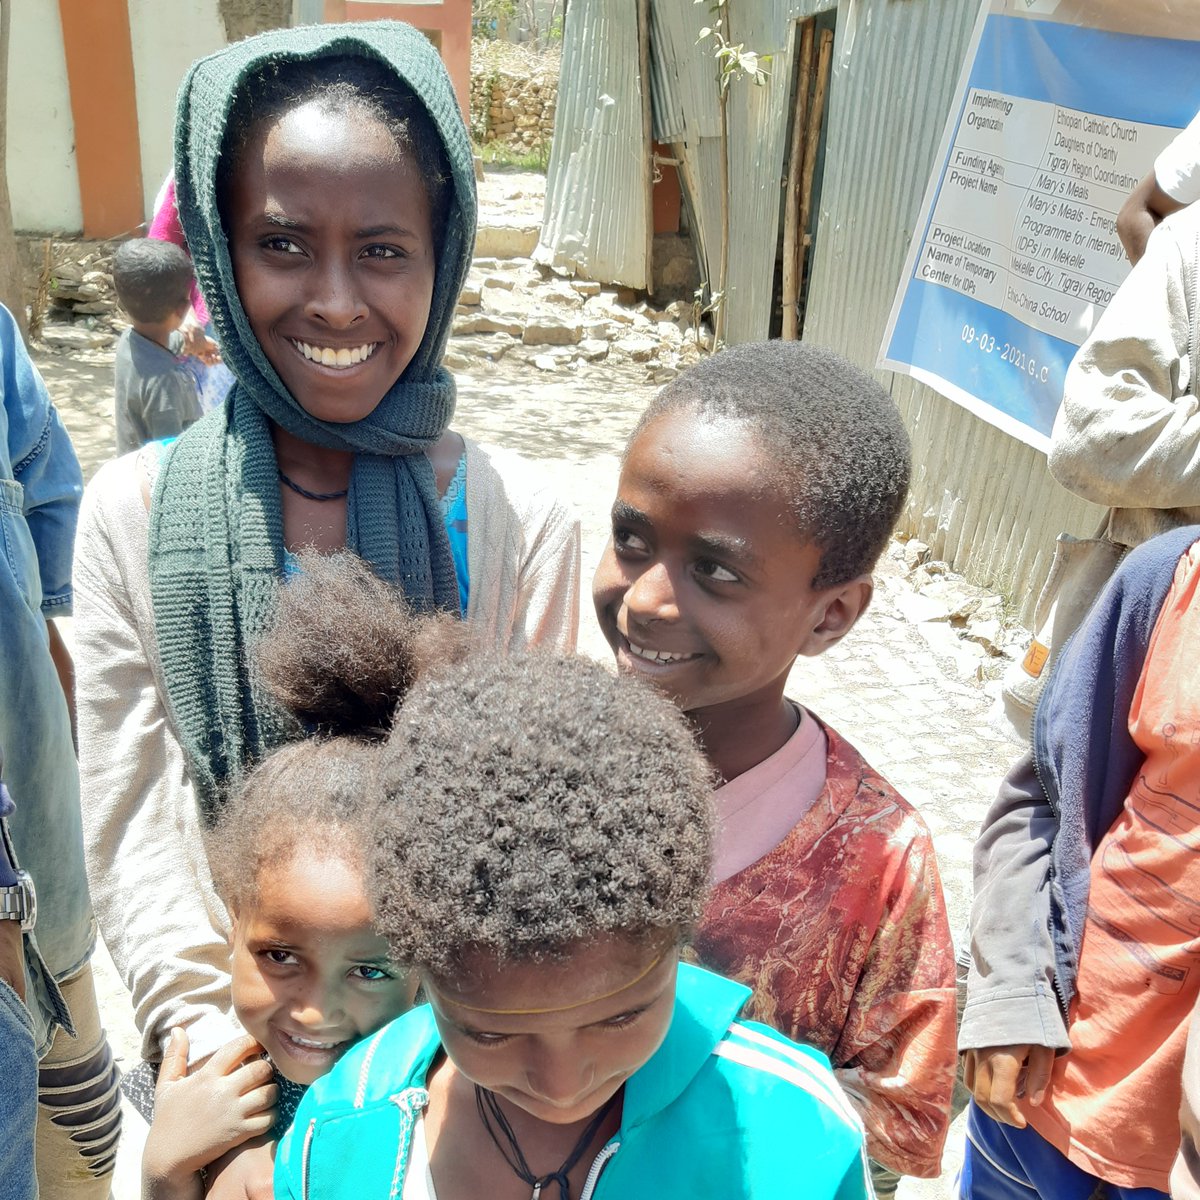 Met in #Tigray these gorgeous 5 siblings. They cannot find their mum. They ran away from conflict. @UNICEFEthiopia is supporting #family tracing and interim #care for hundreds of #children. @UNICEF @USAIDSavesLives @eu_echo @UKinEthiopia @unicefprotects